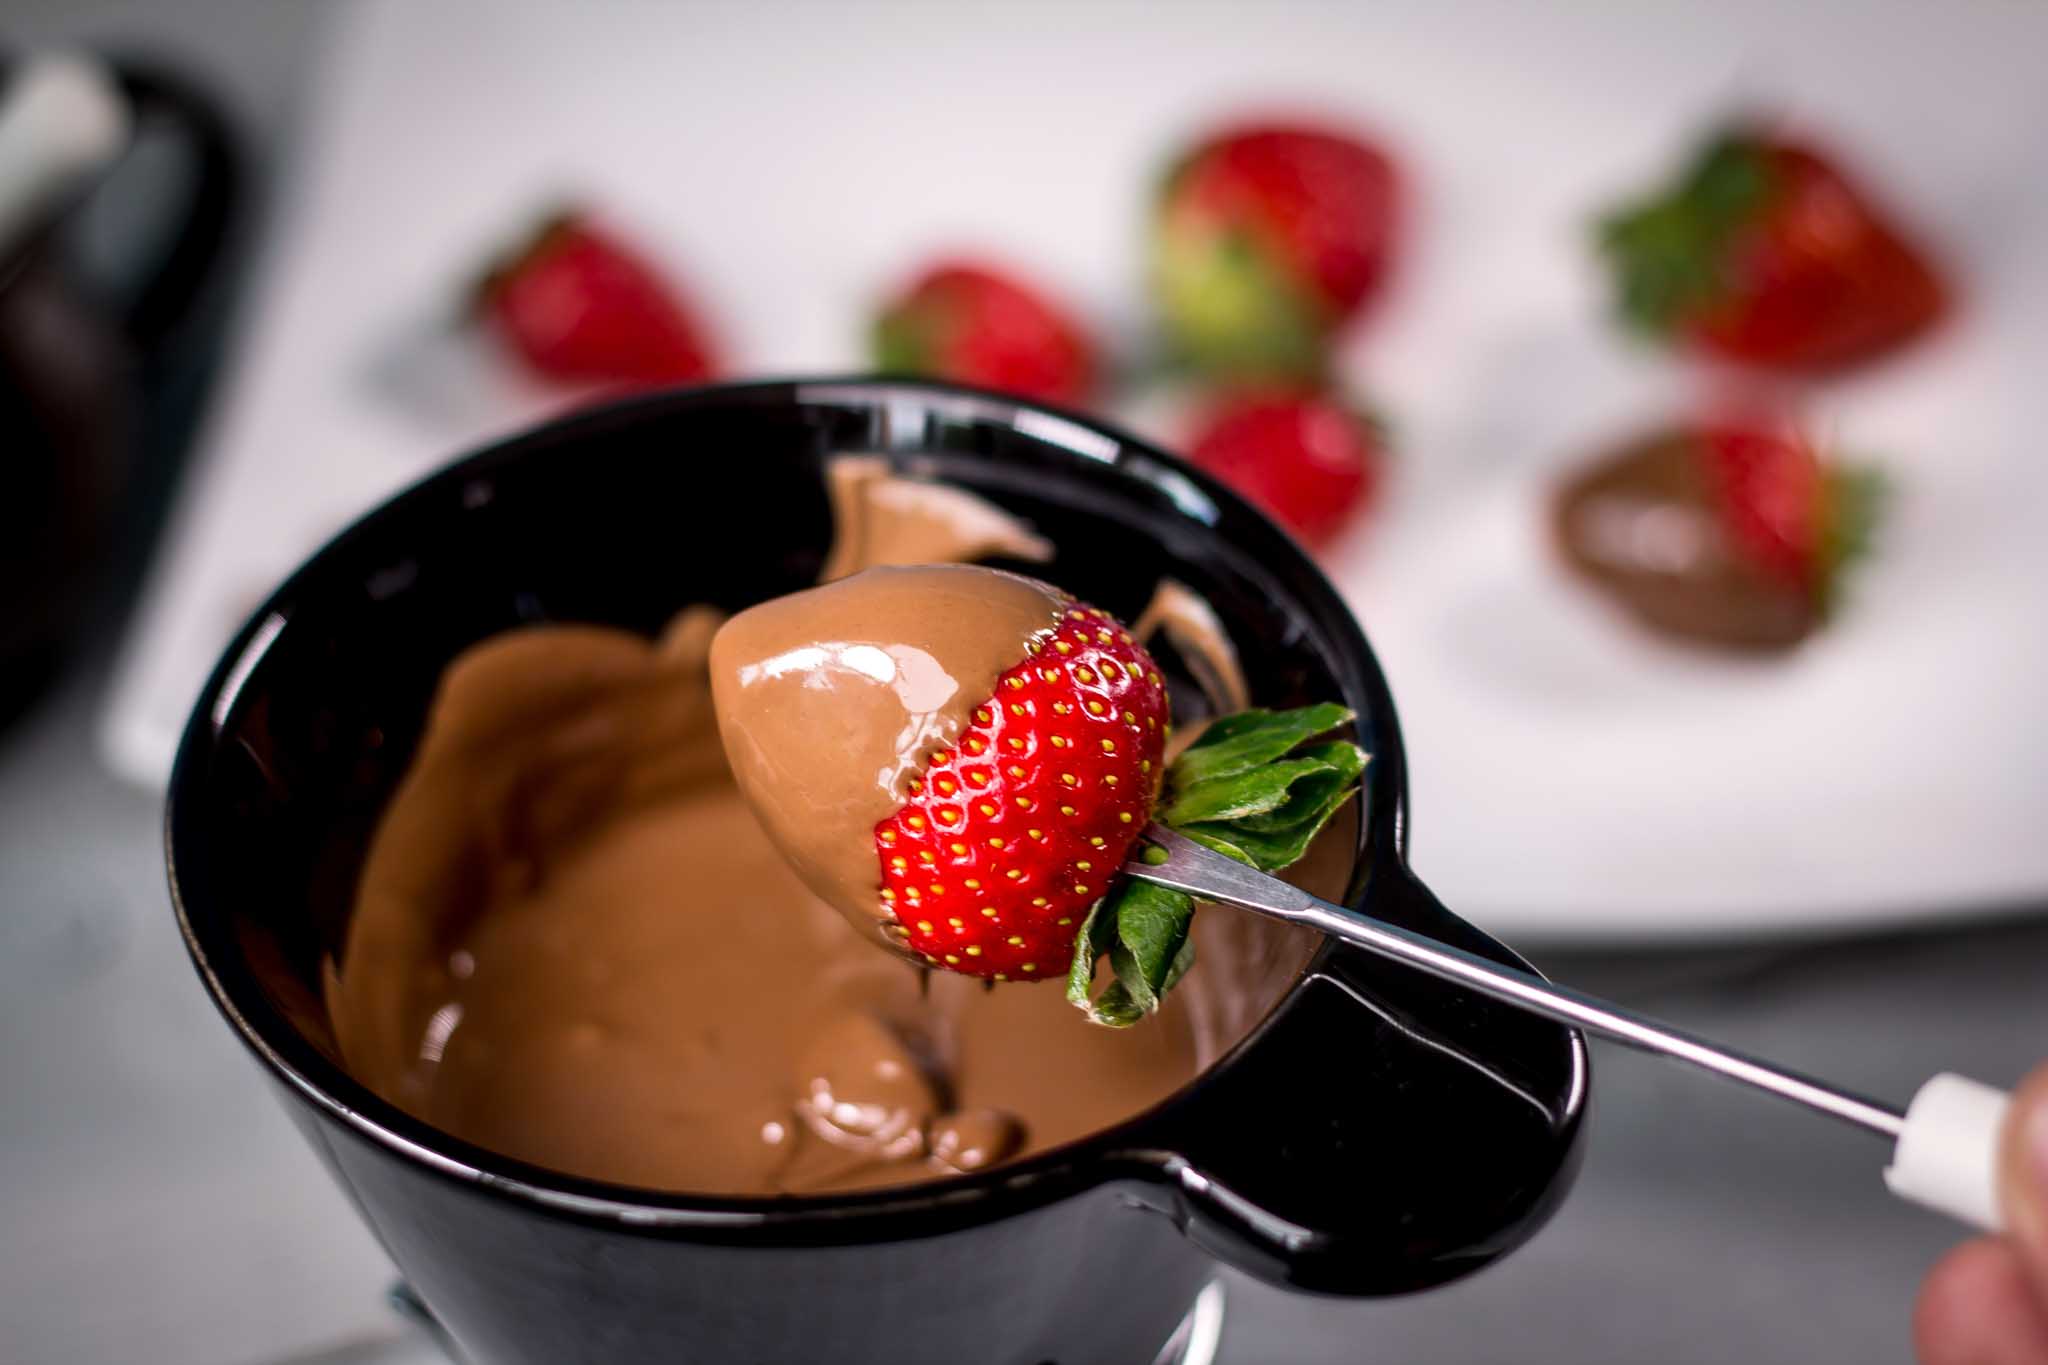 Chocolate fondue at The Real Food Academy.